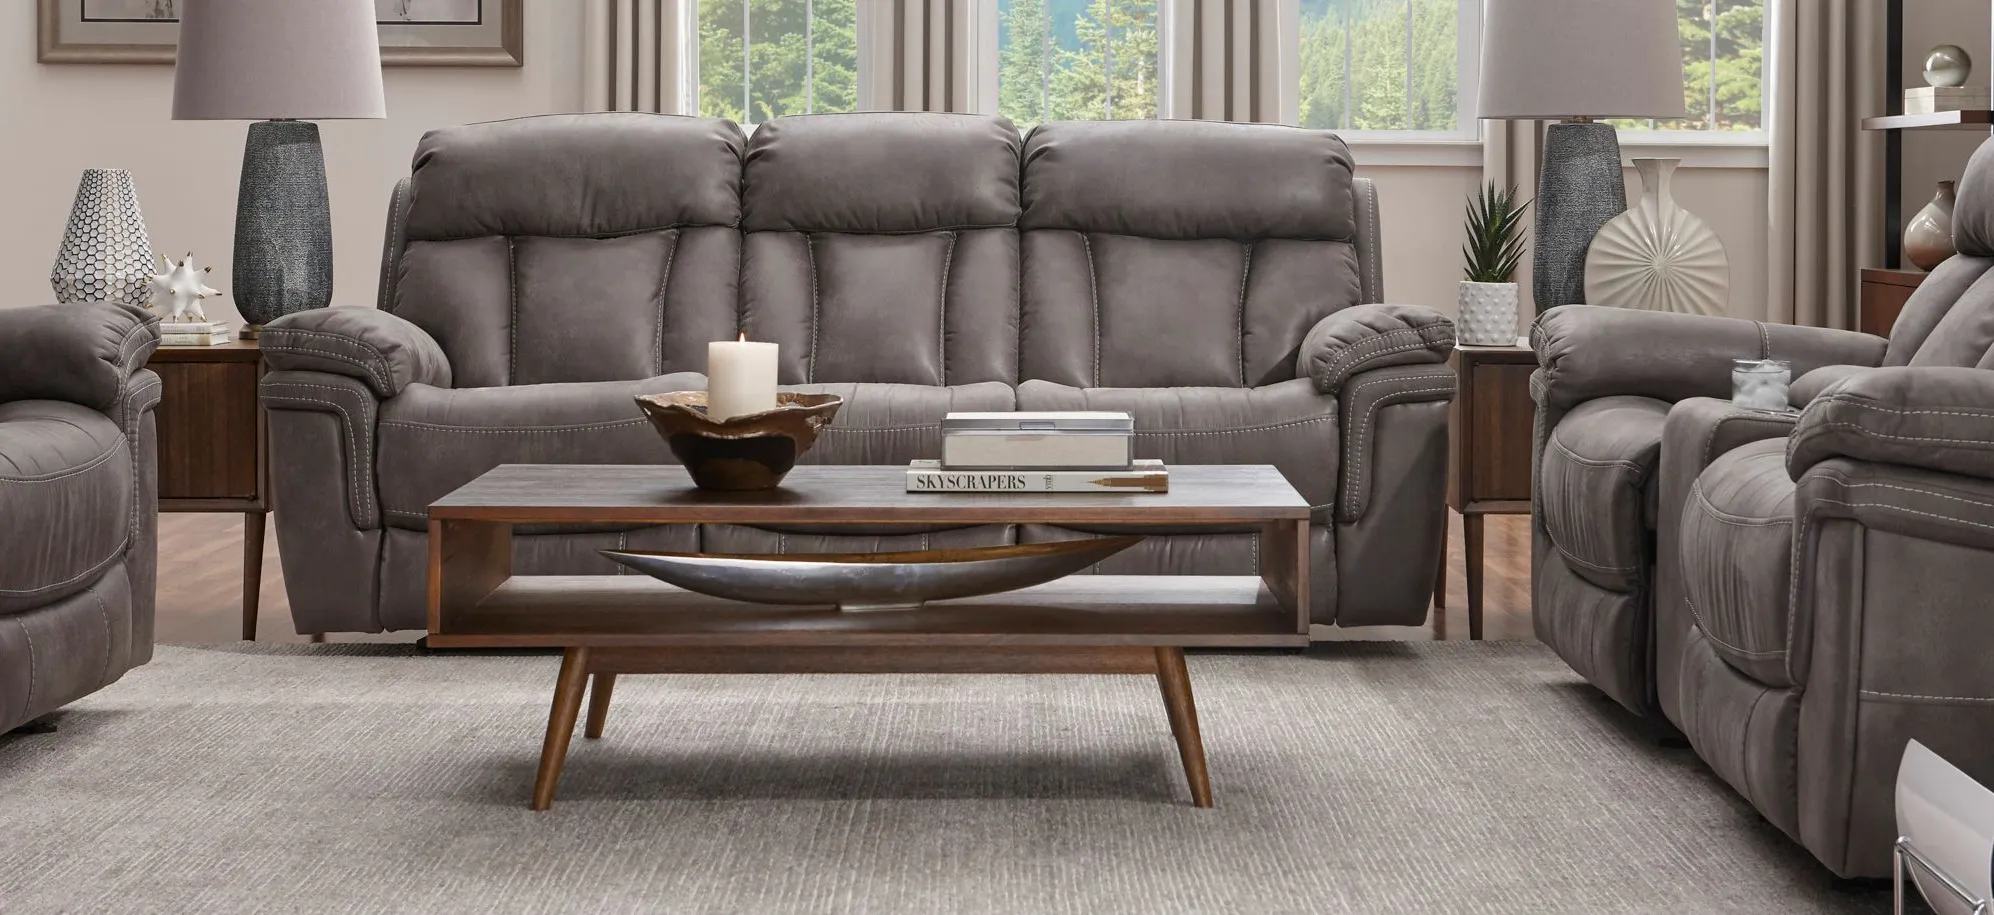 Ryder 2-pc. Reclining Sofa and Loveseat Set with Console in Gray by Bellanest